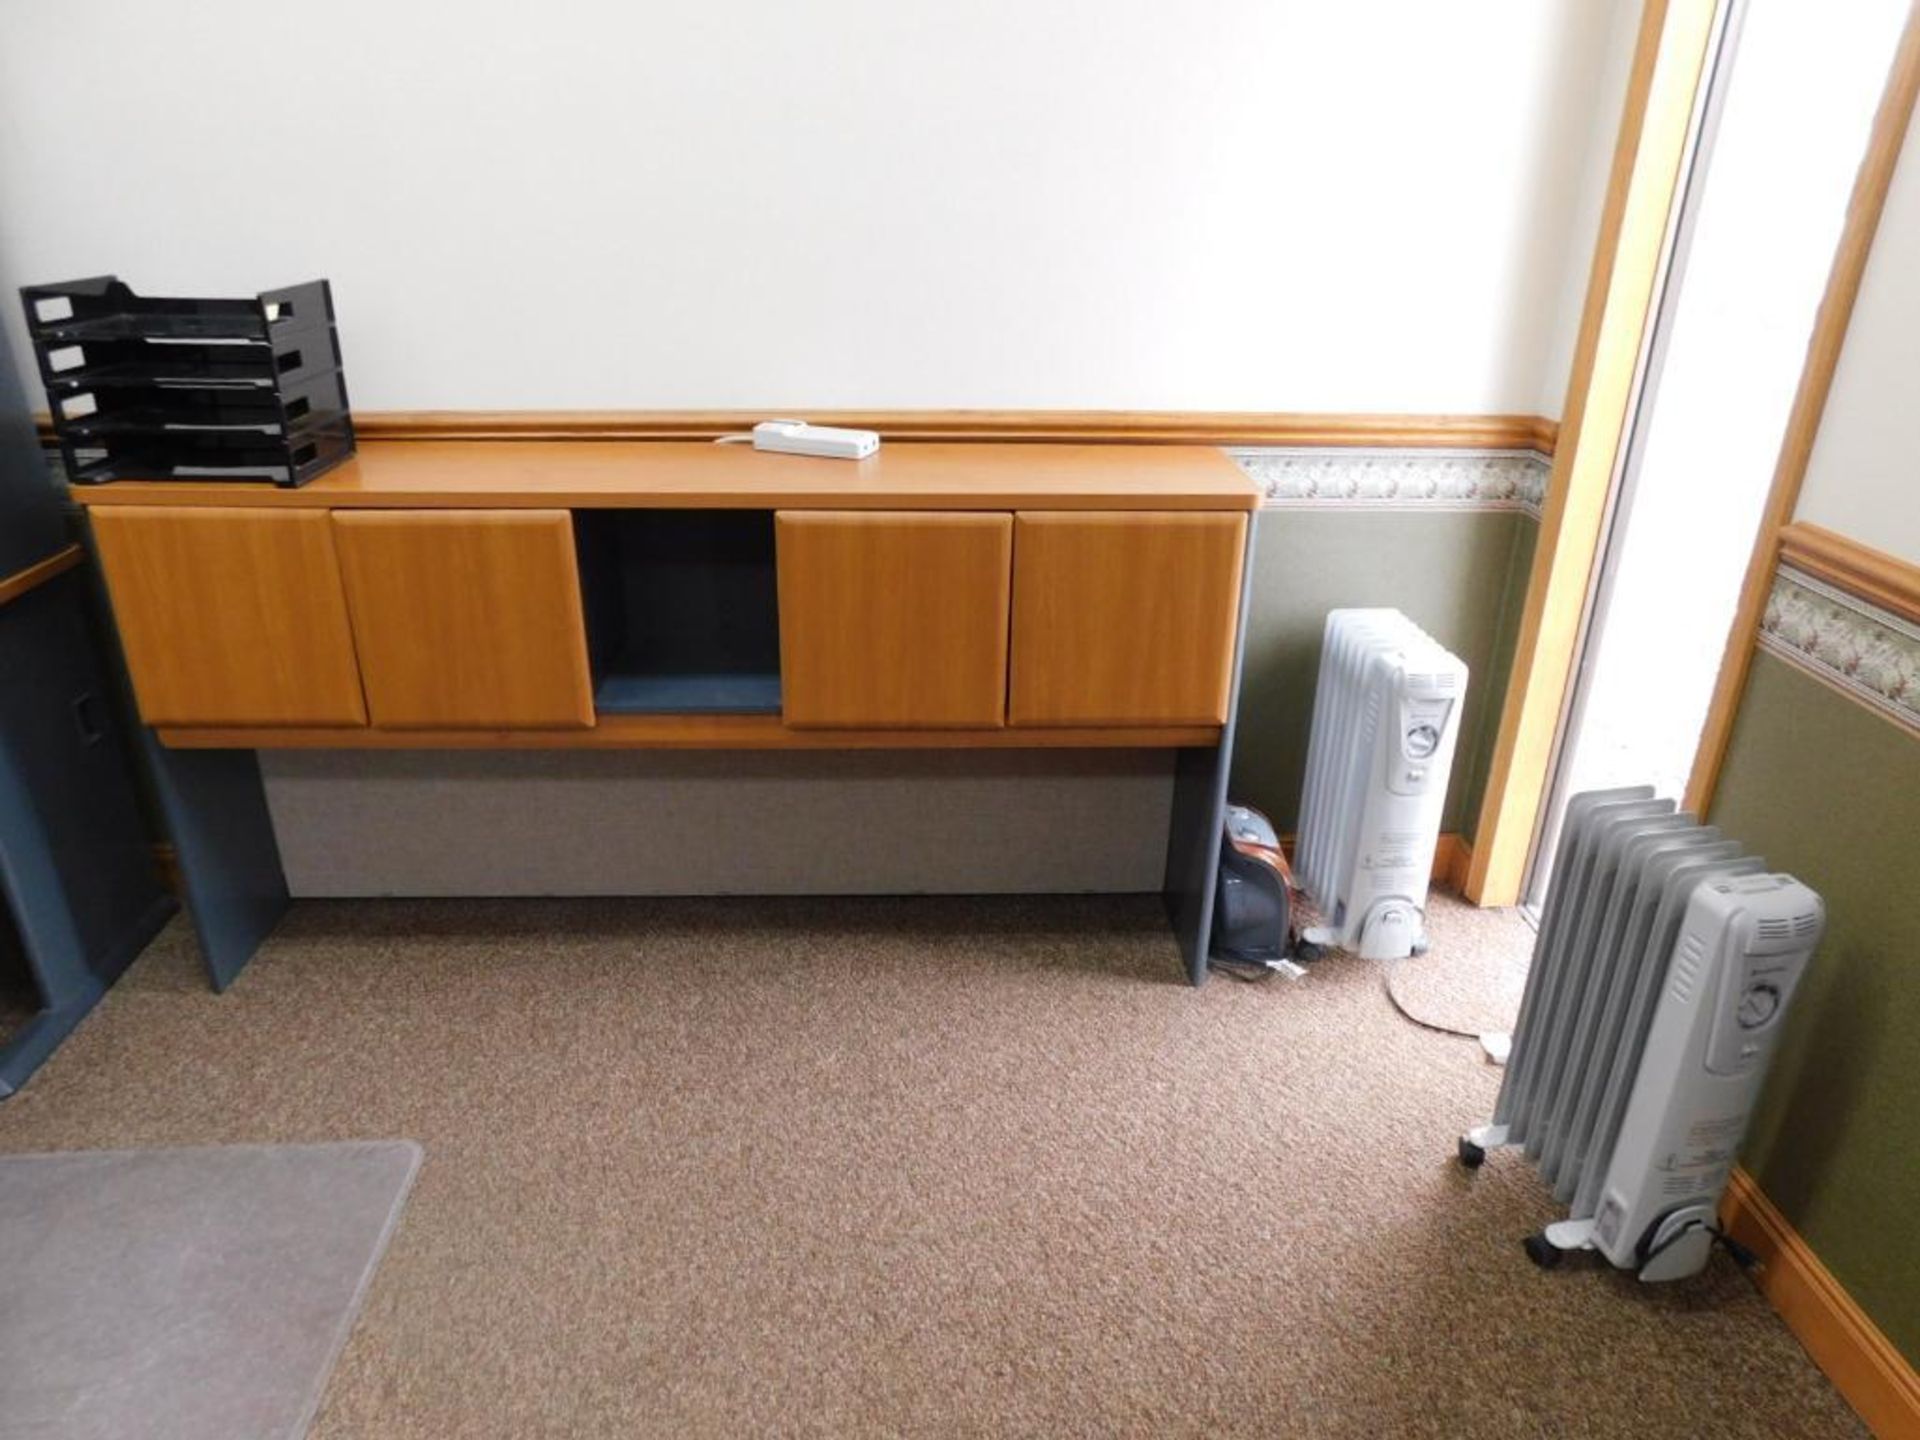 LOT: Contents of Main Office (NO ART, NO ELECTRONICS, NOTHING ATTACHED TO WALLS) - Image 14 of 27